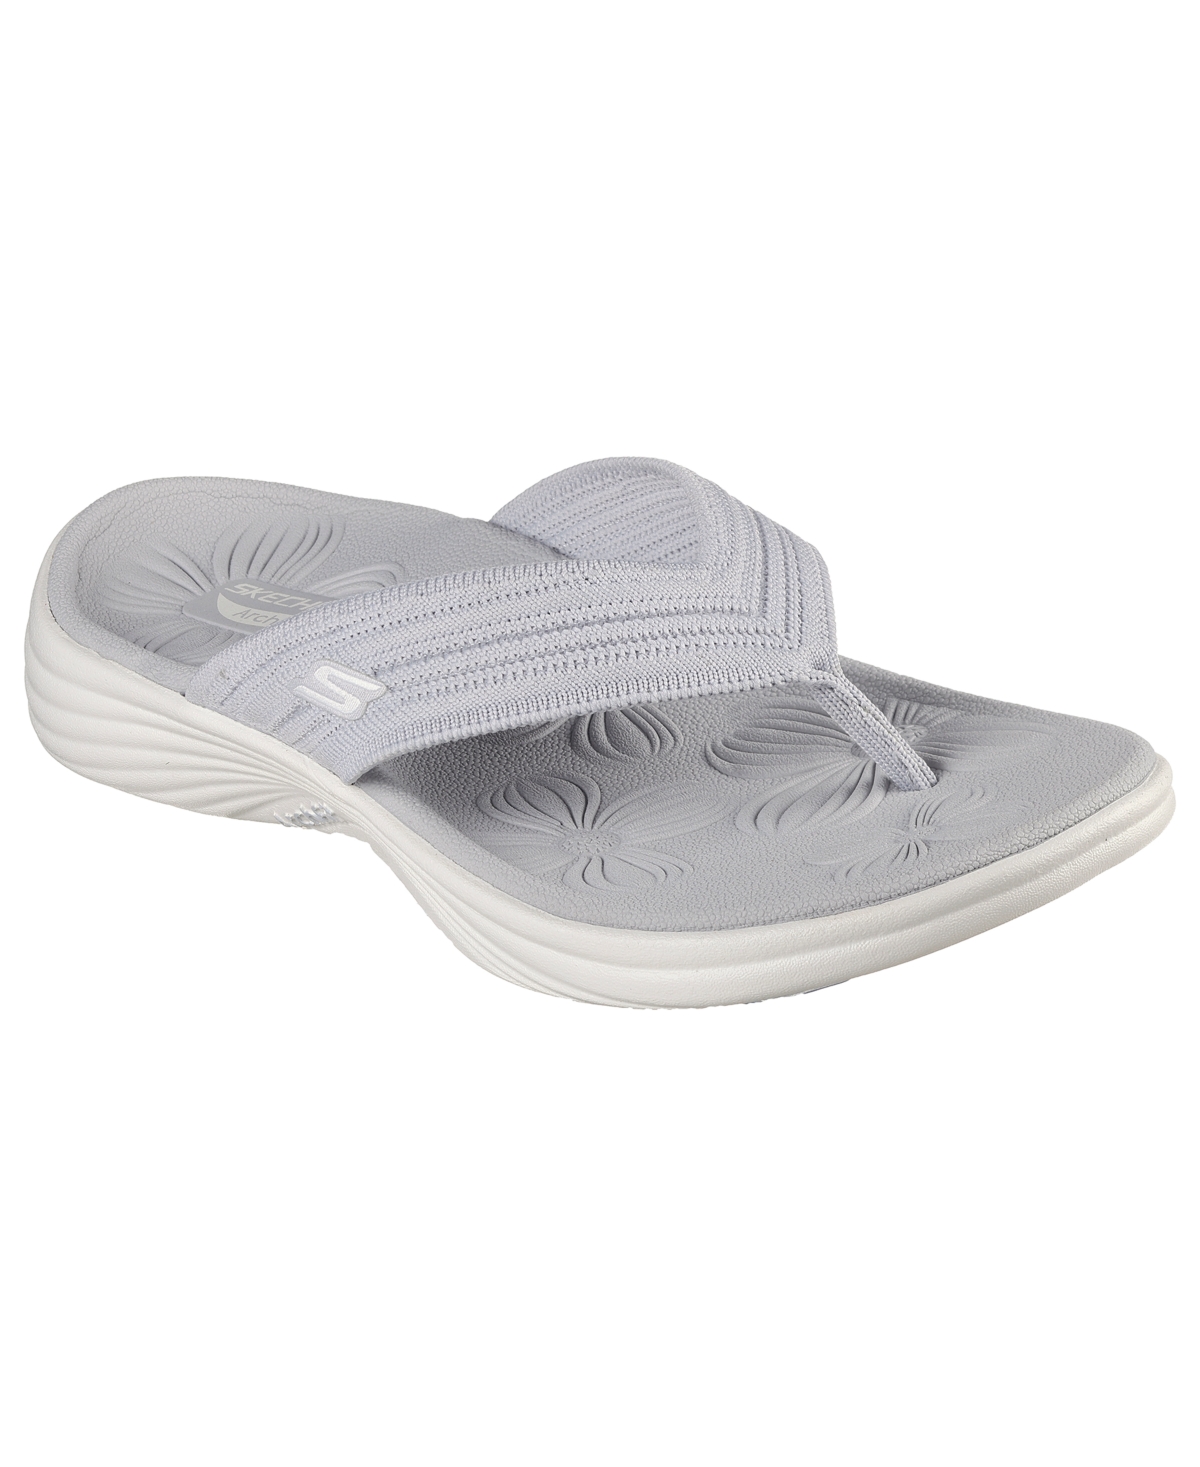 Women's Go Walk Arch Fit Radiance - Lure Thong Sandals from Finish Line - Gray